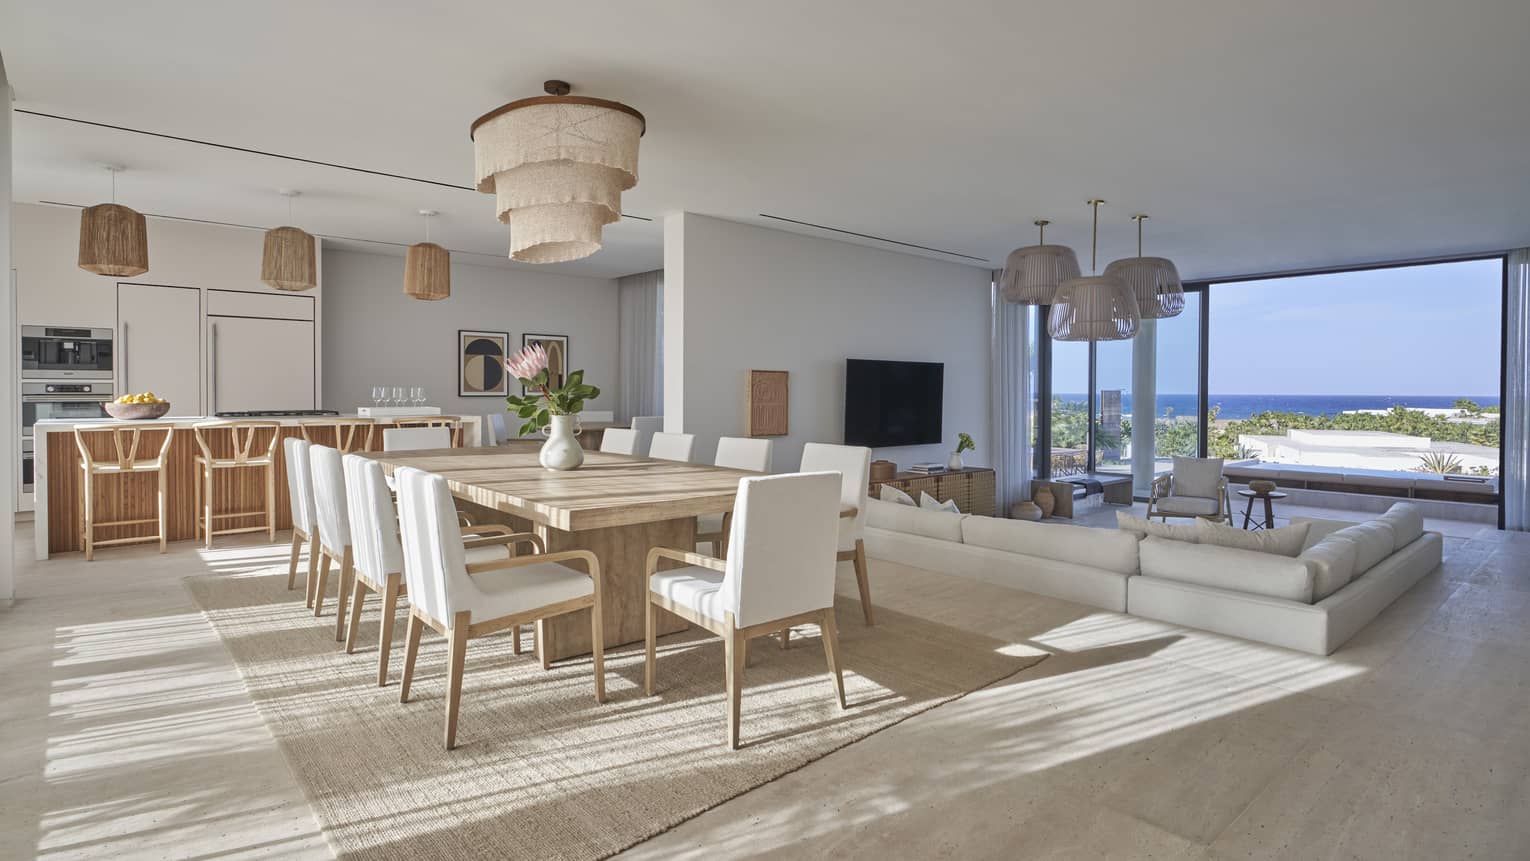 Modern open living area with dining table and white chairs, kitchen with barstools and sunken sectional facing tall windows and water view